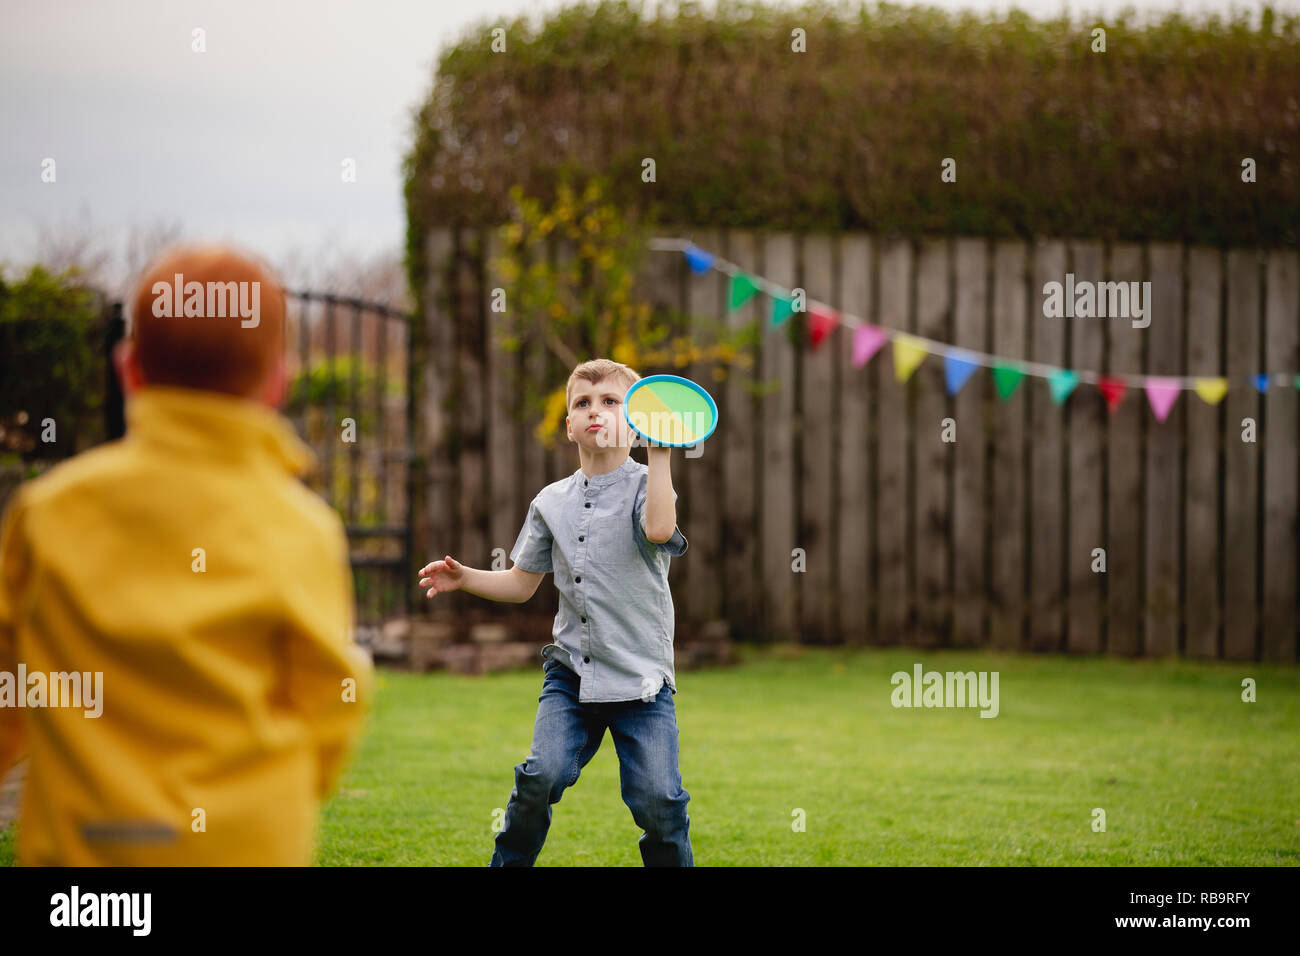 Two young boys playing outside in a back garden. They are throwing a tennis ball to each other and catching it with a velcro mitt. Stock Photo